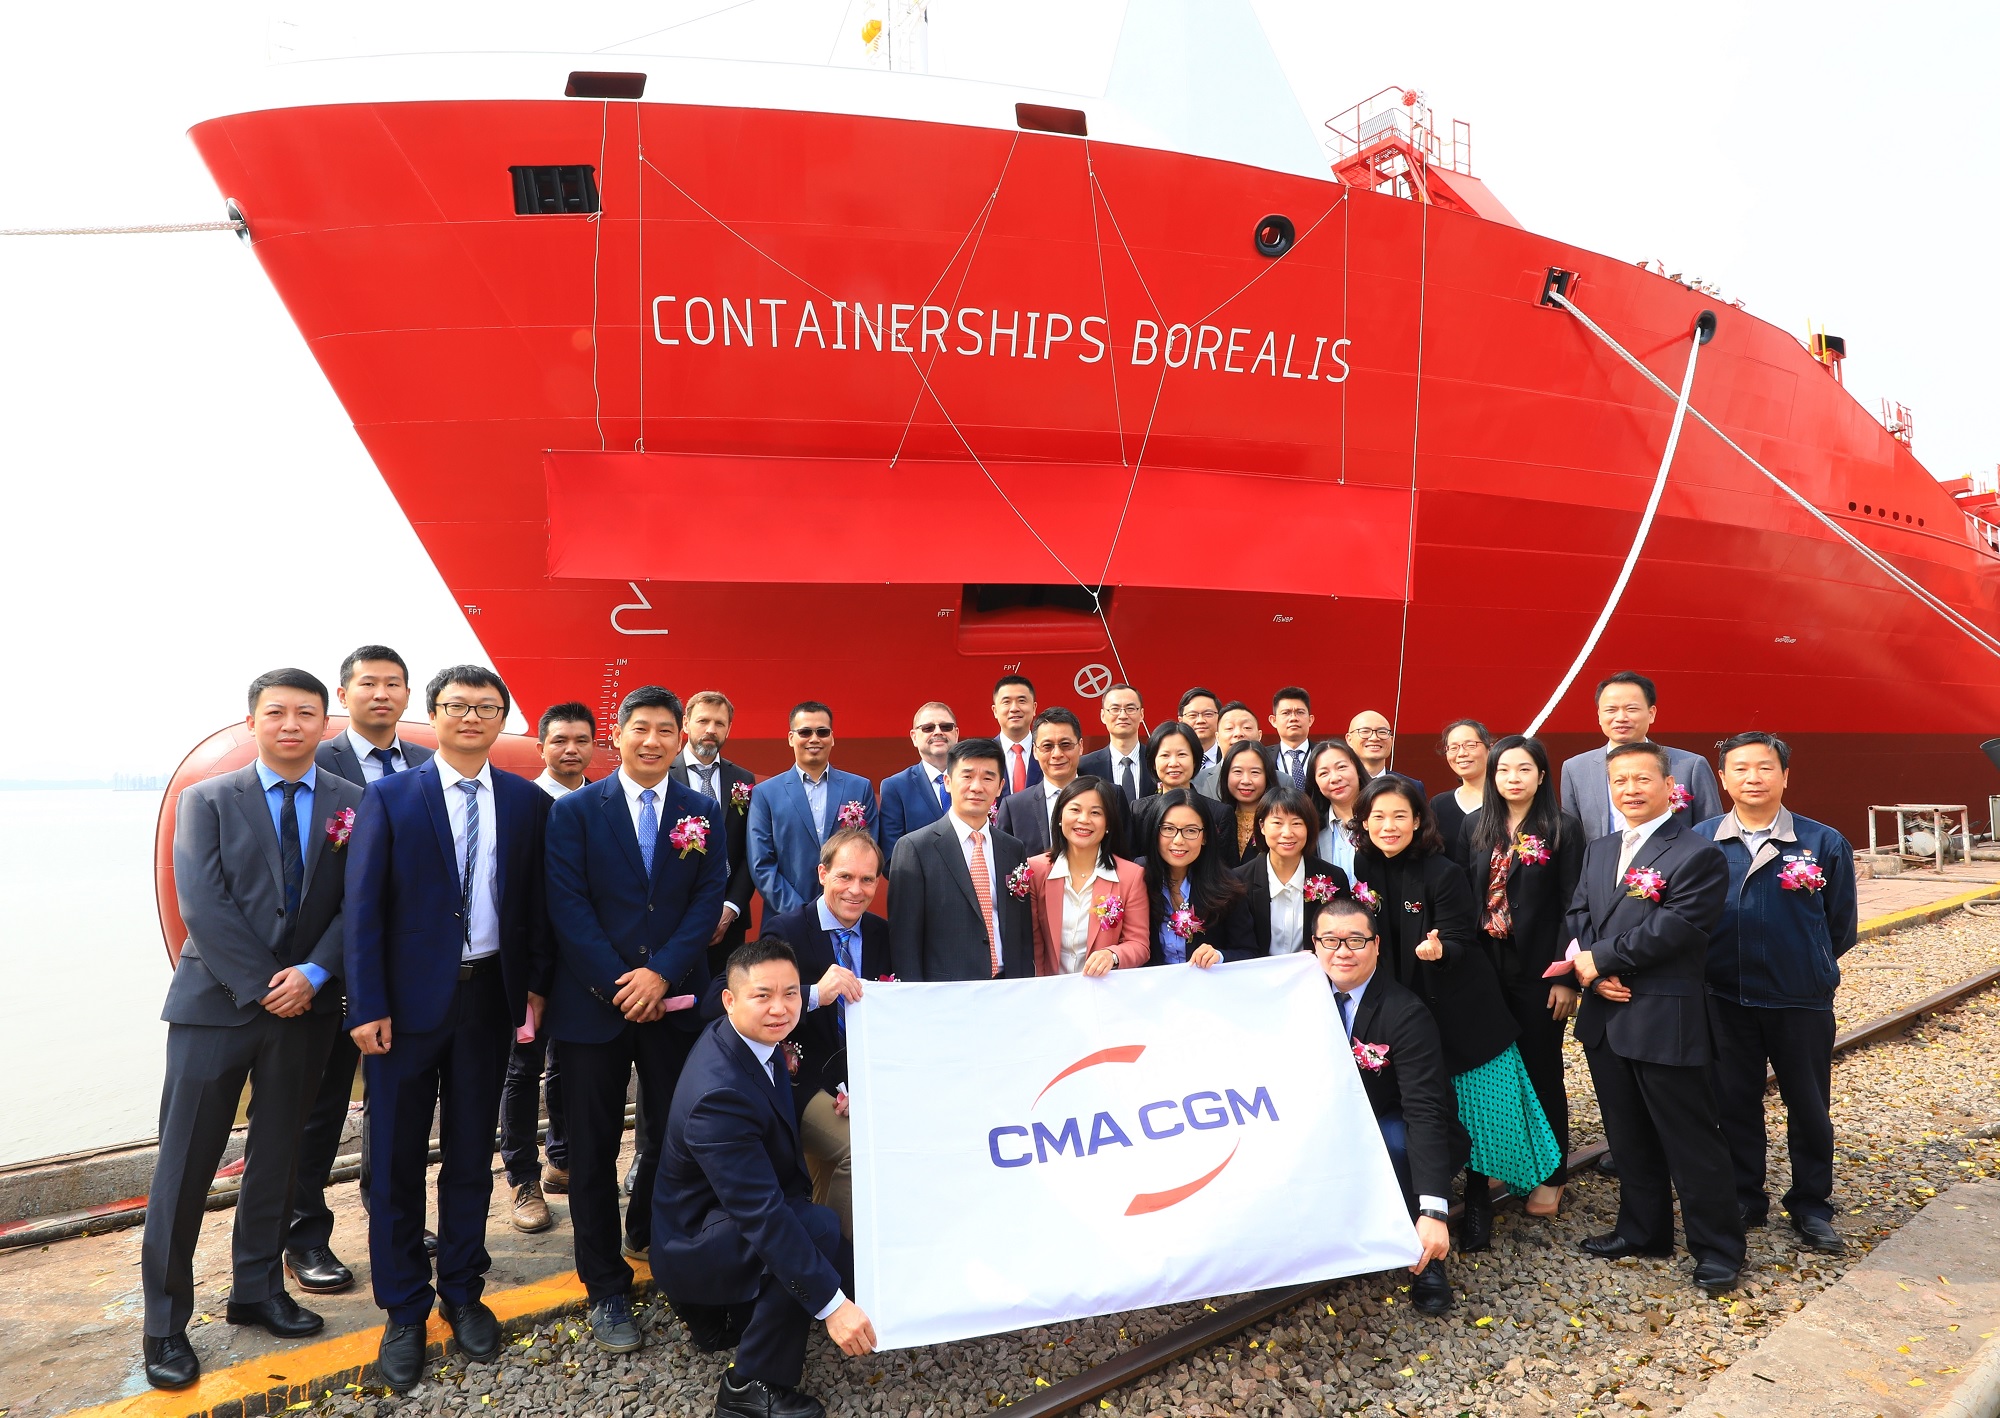 Containerships Borealis completes maiden voyage